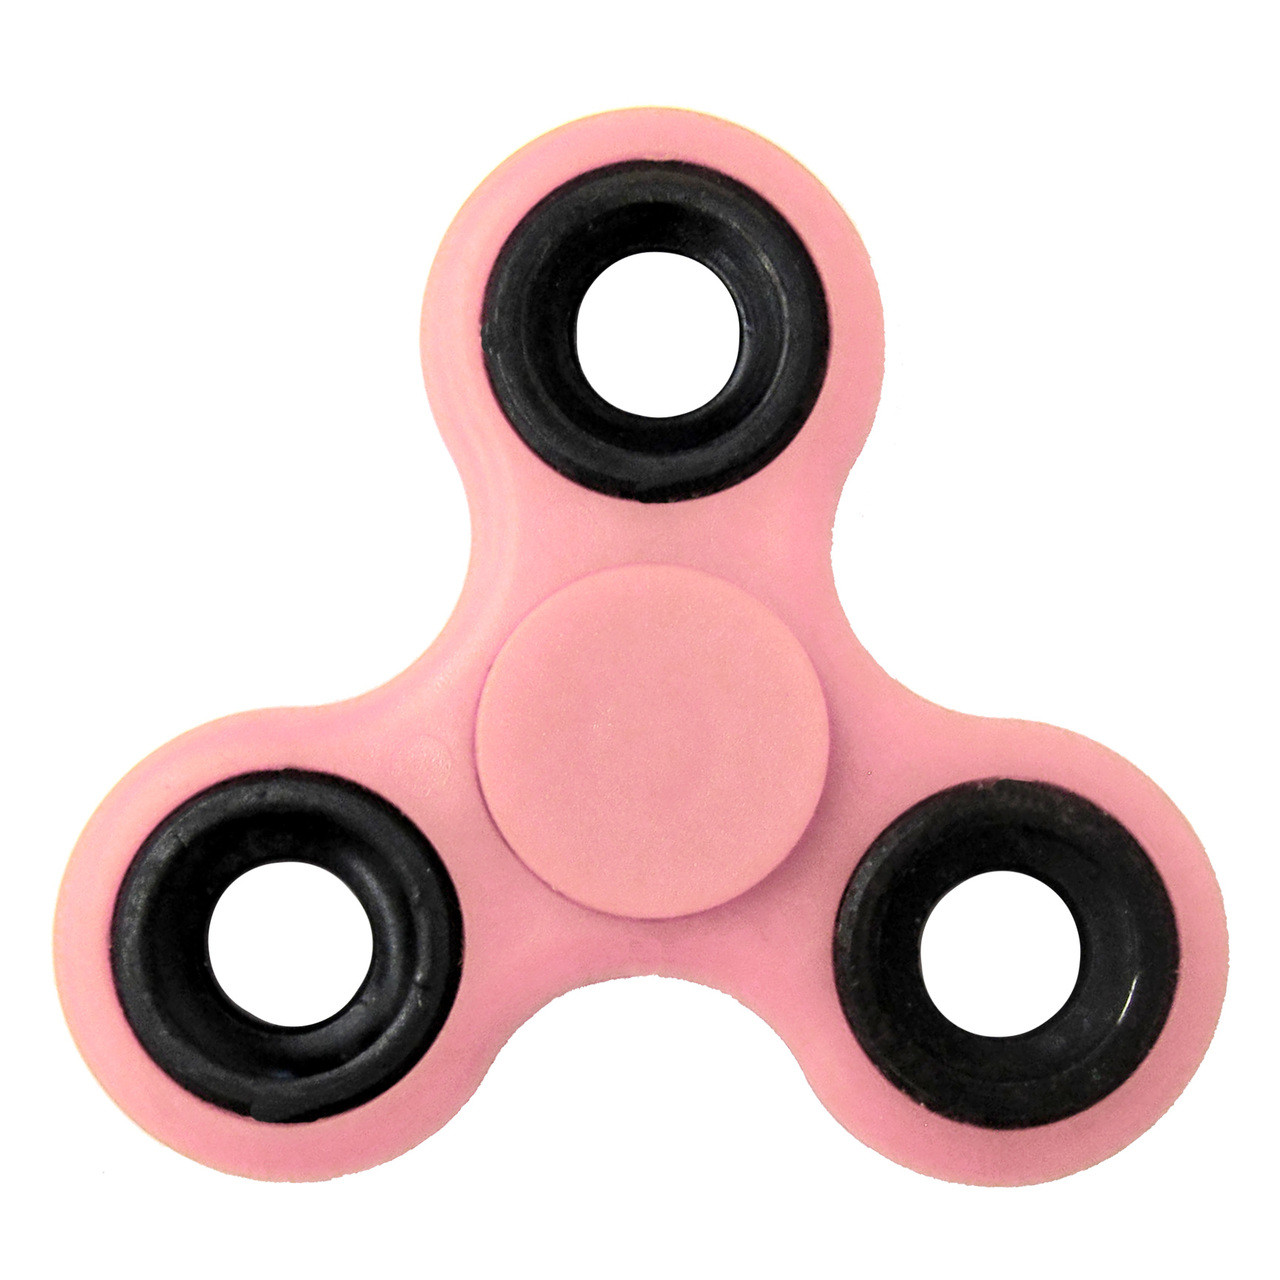 History of Fidget Spinners - Quality Logo Products